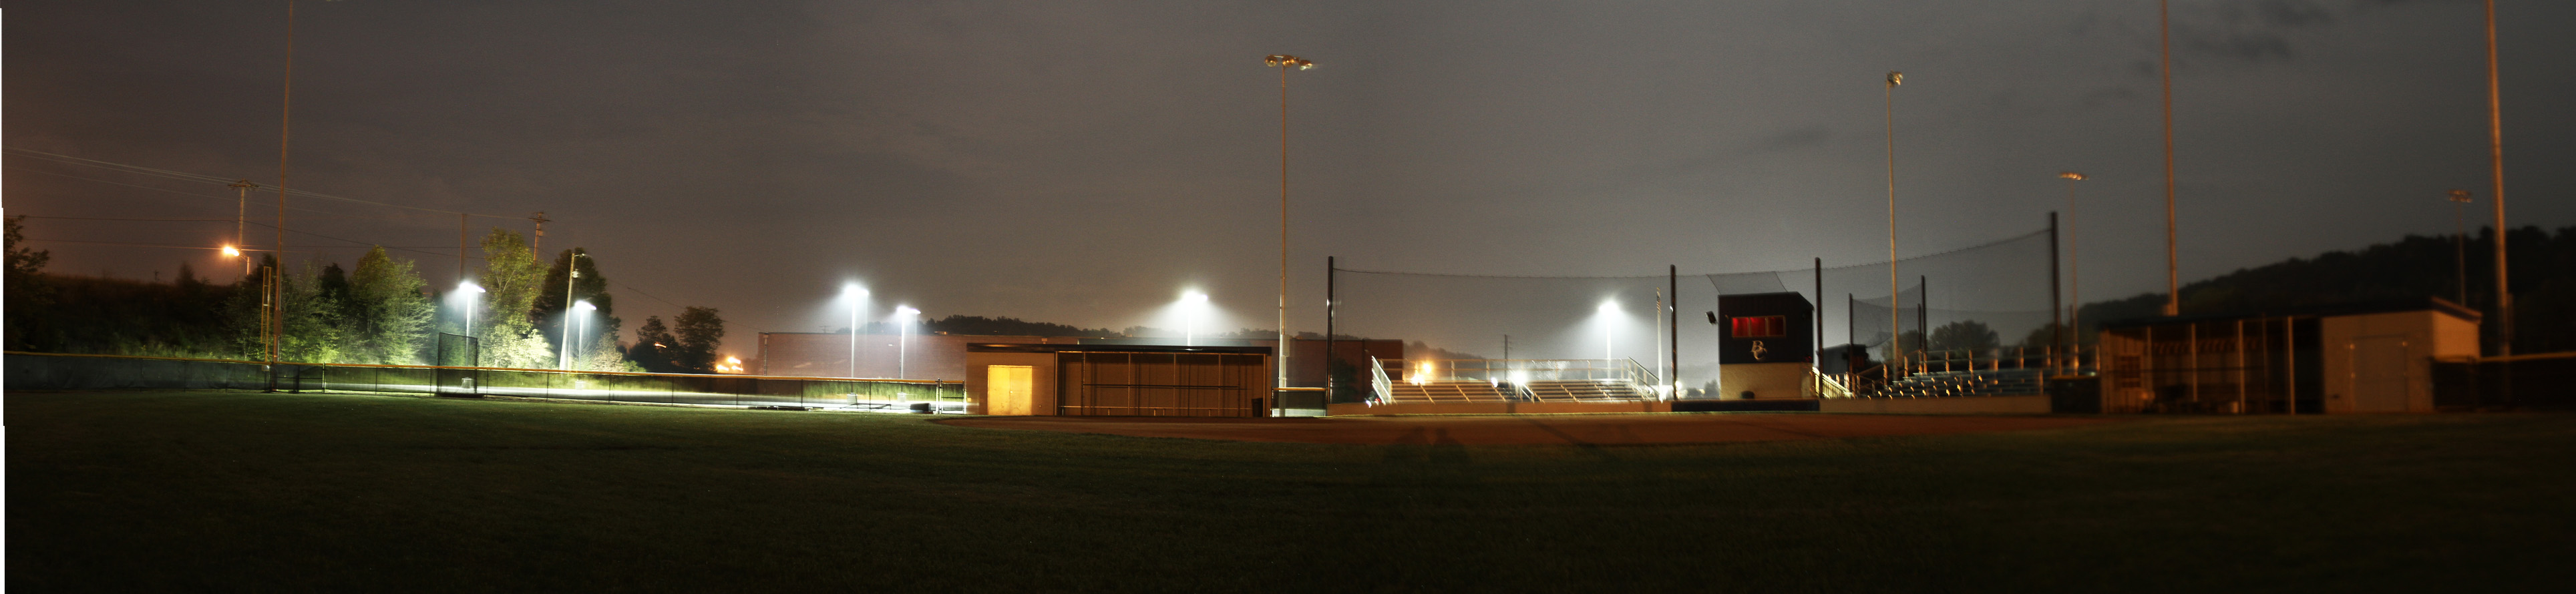 A panoramic photo taken late at night on the Butler County softball field. Composed of 4 separate long exposures.